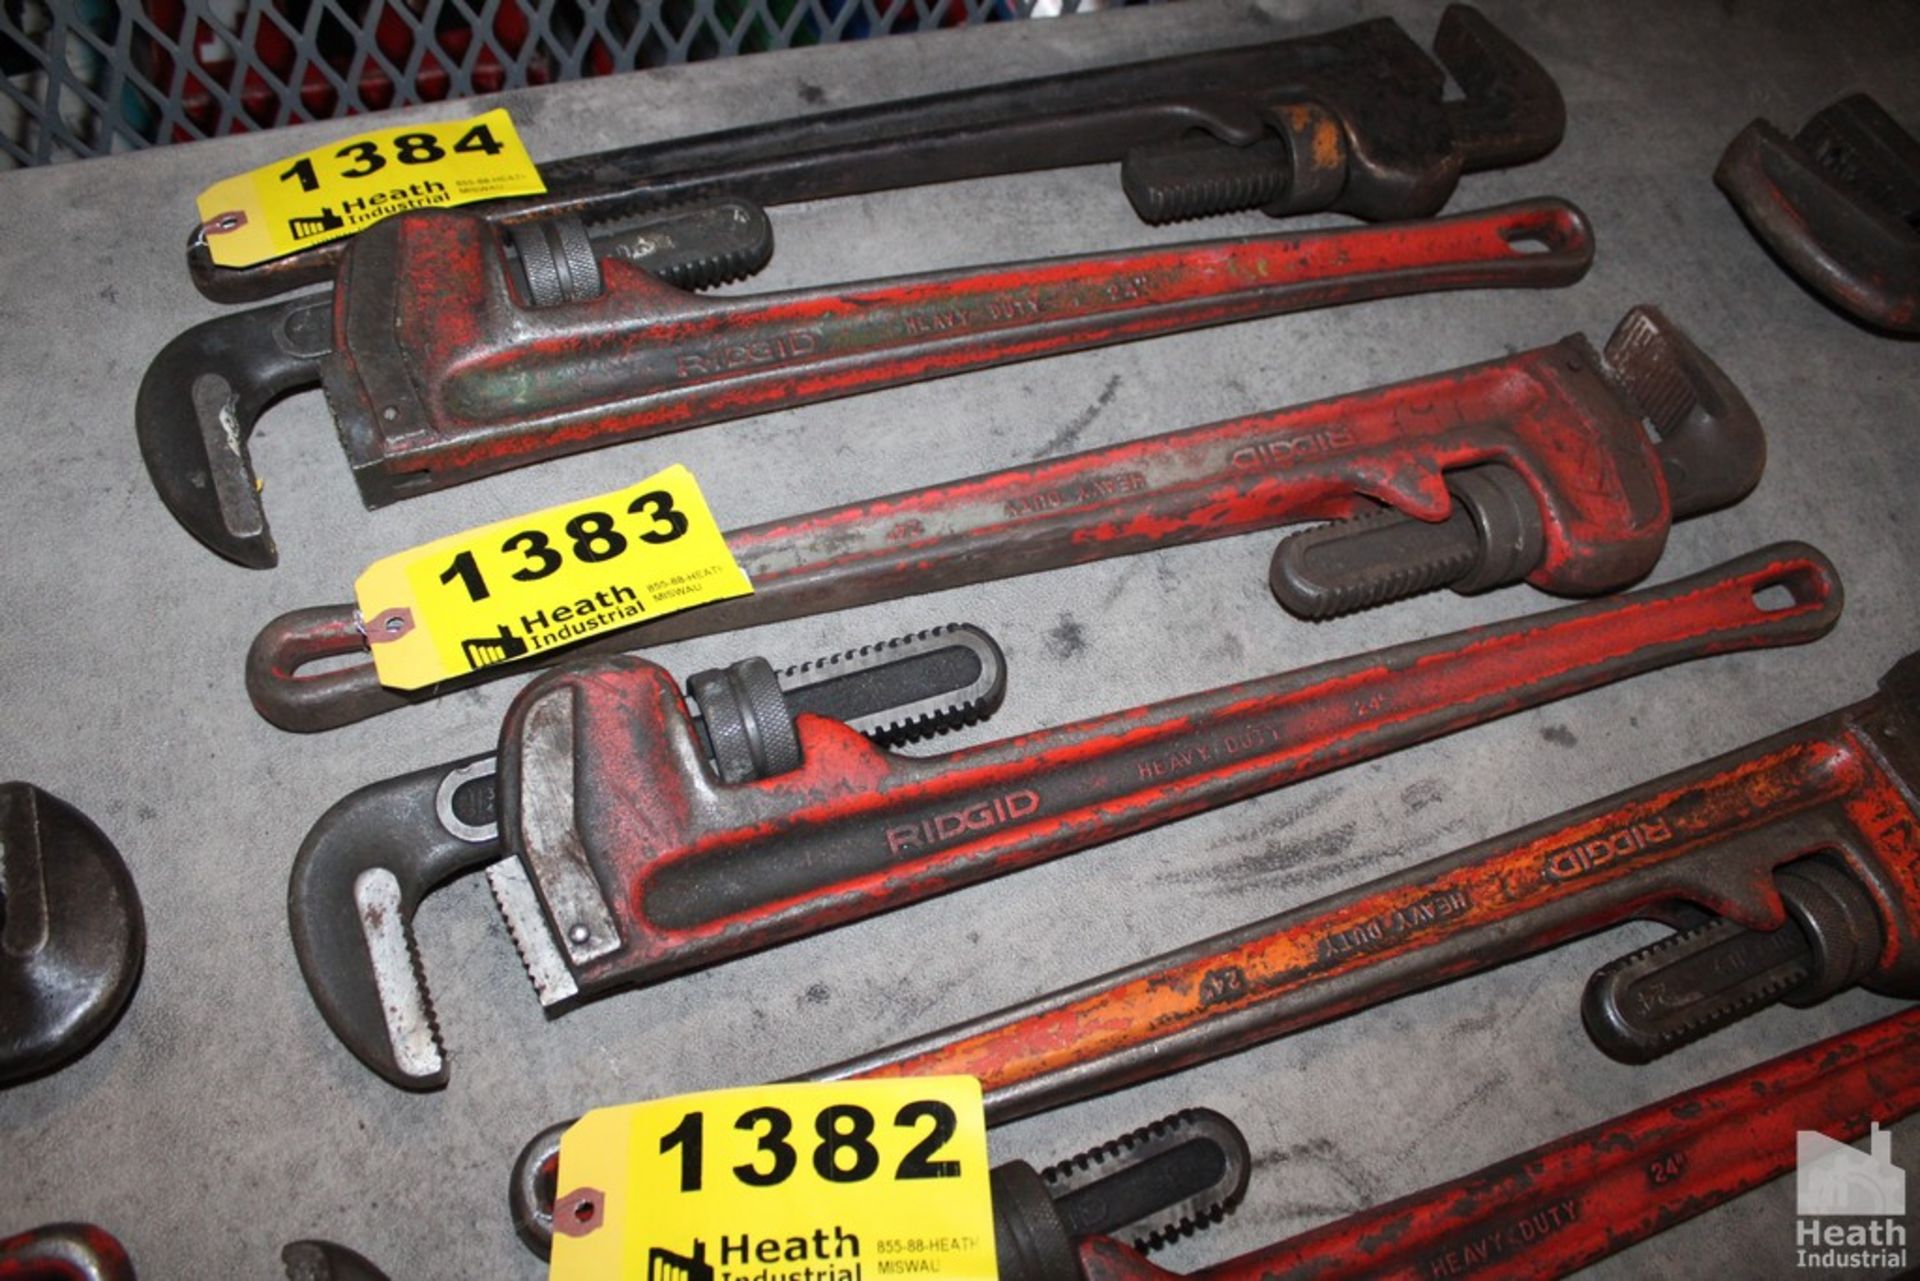 (2) RIDGID 24" PIPE WRENCHES